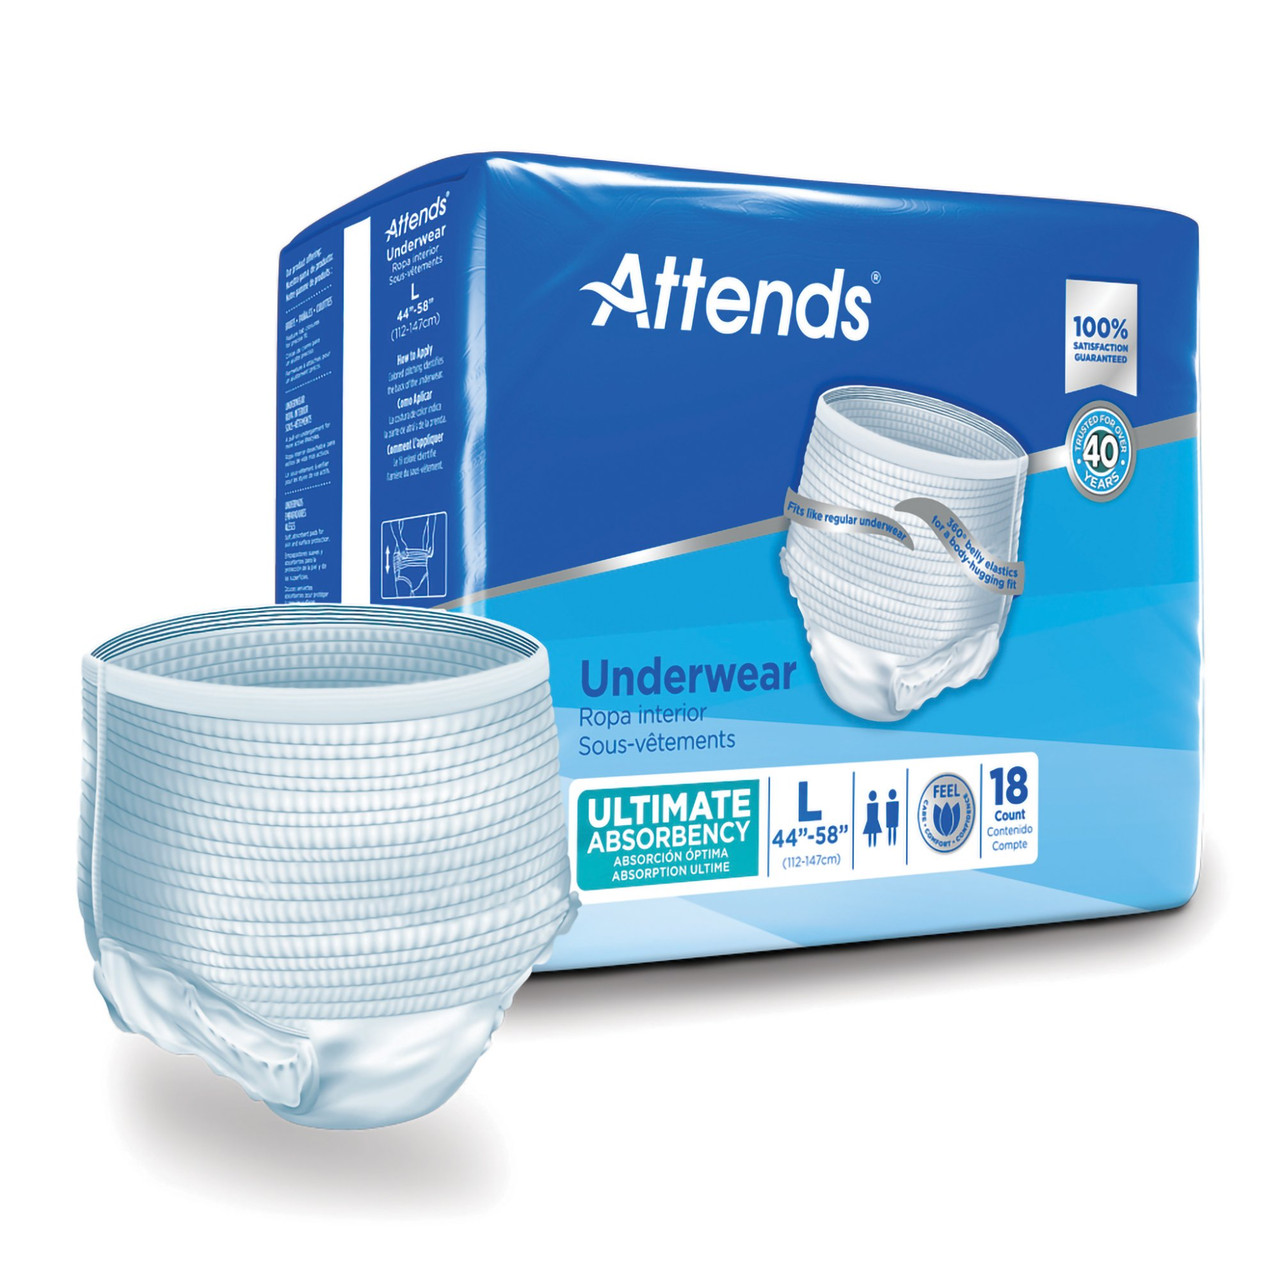 Attends Advanced Incontinence Underwear, Heavy Absorbency - Unisex, Classic  Super Plus for Adults - Simply Medical